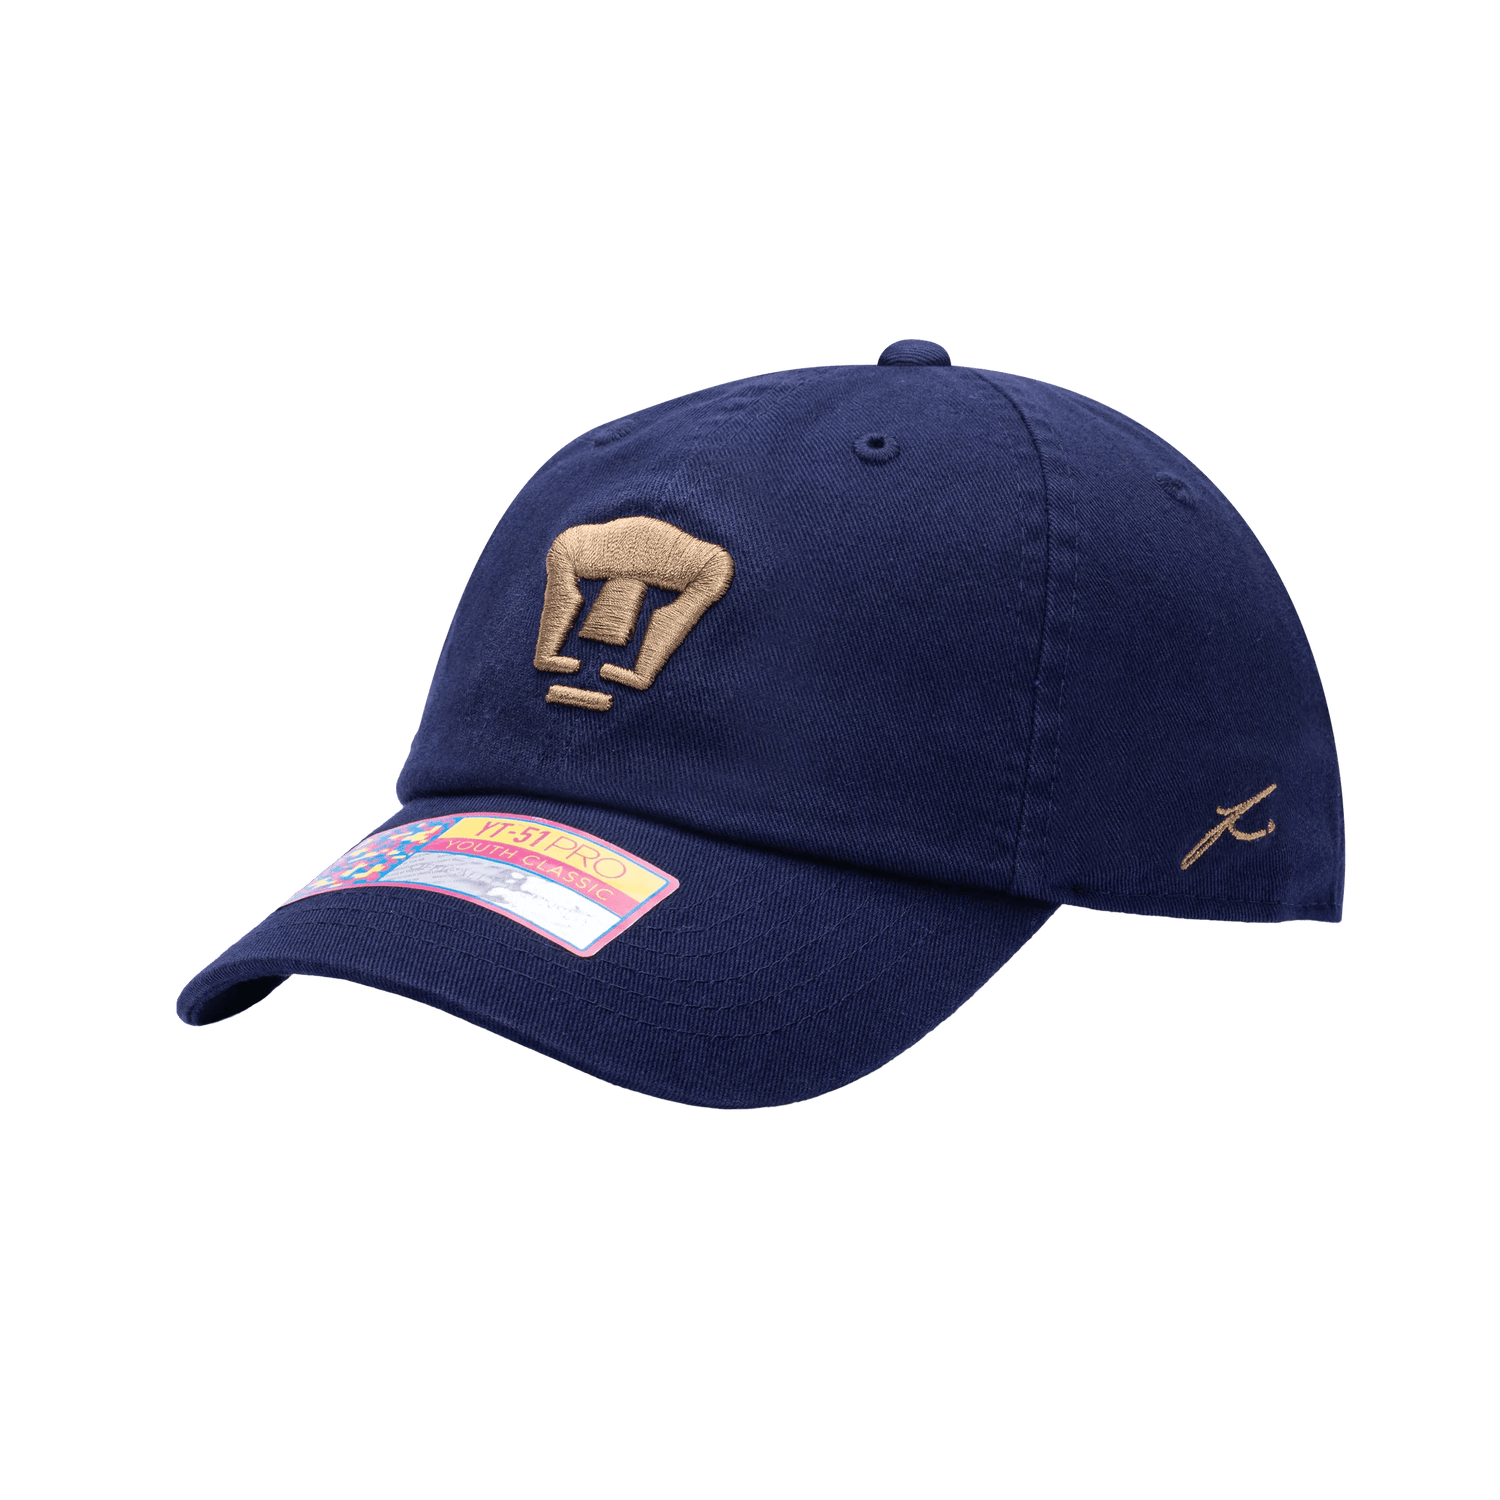 FI Collection Club Pumas Bambo Classic Hat (Lateral - Side 1)